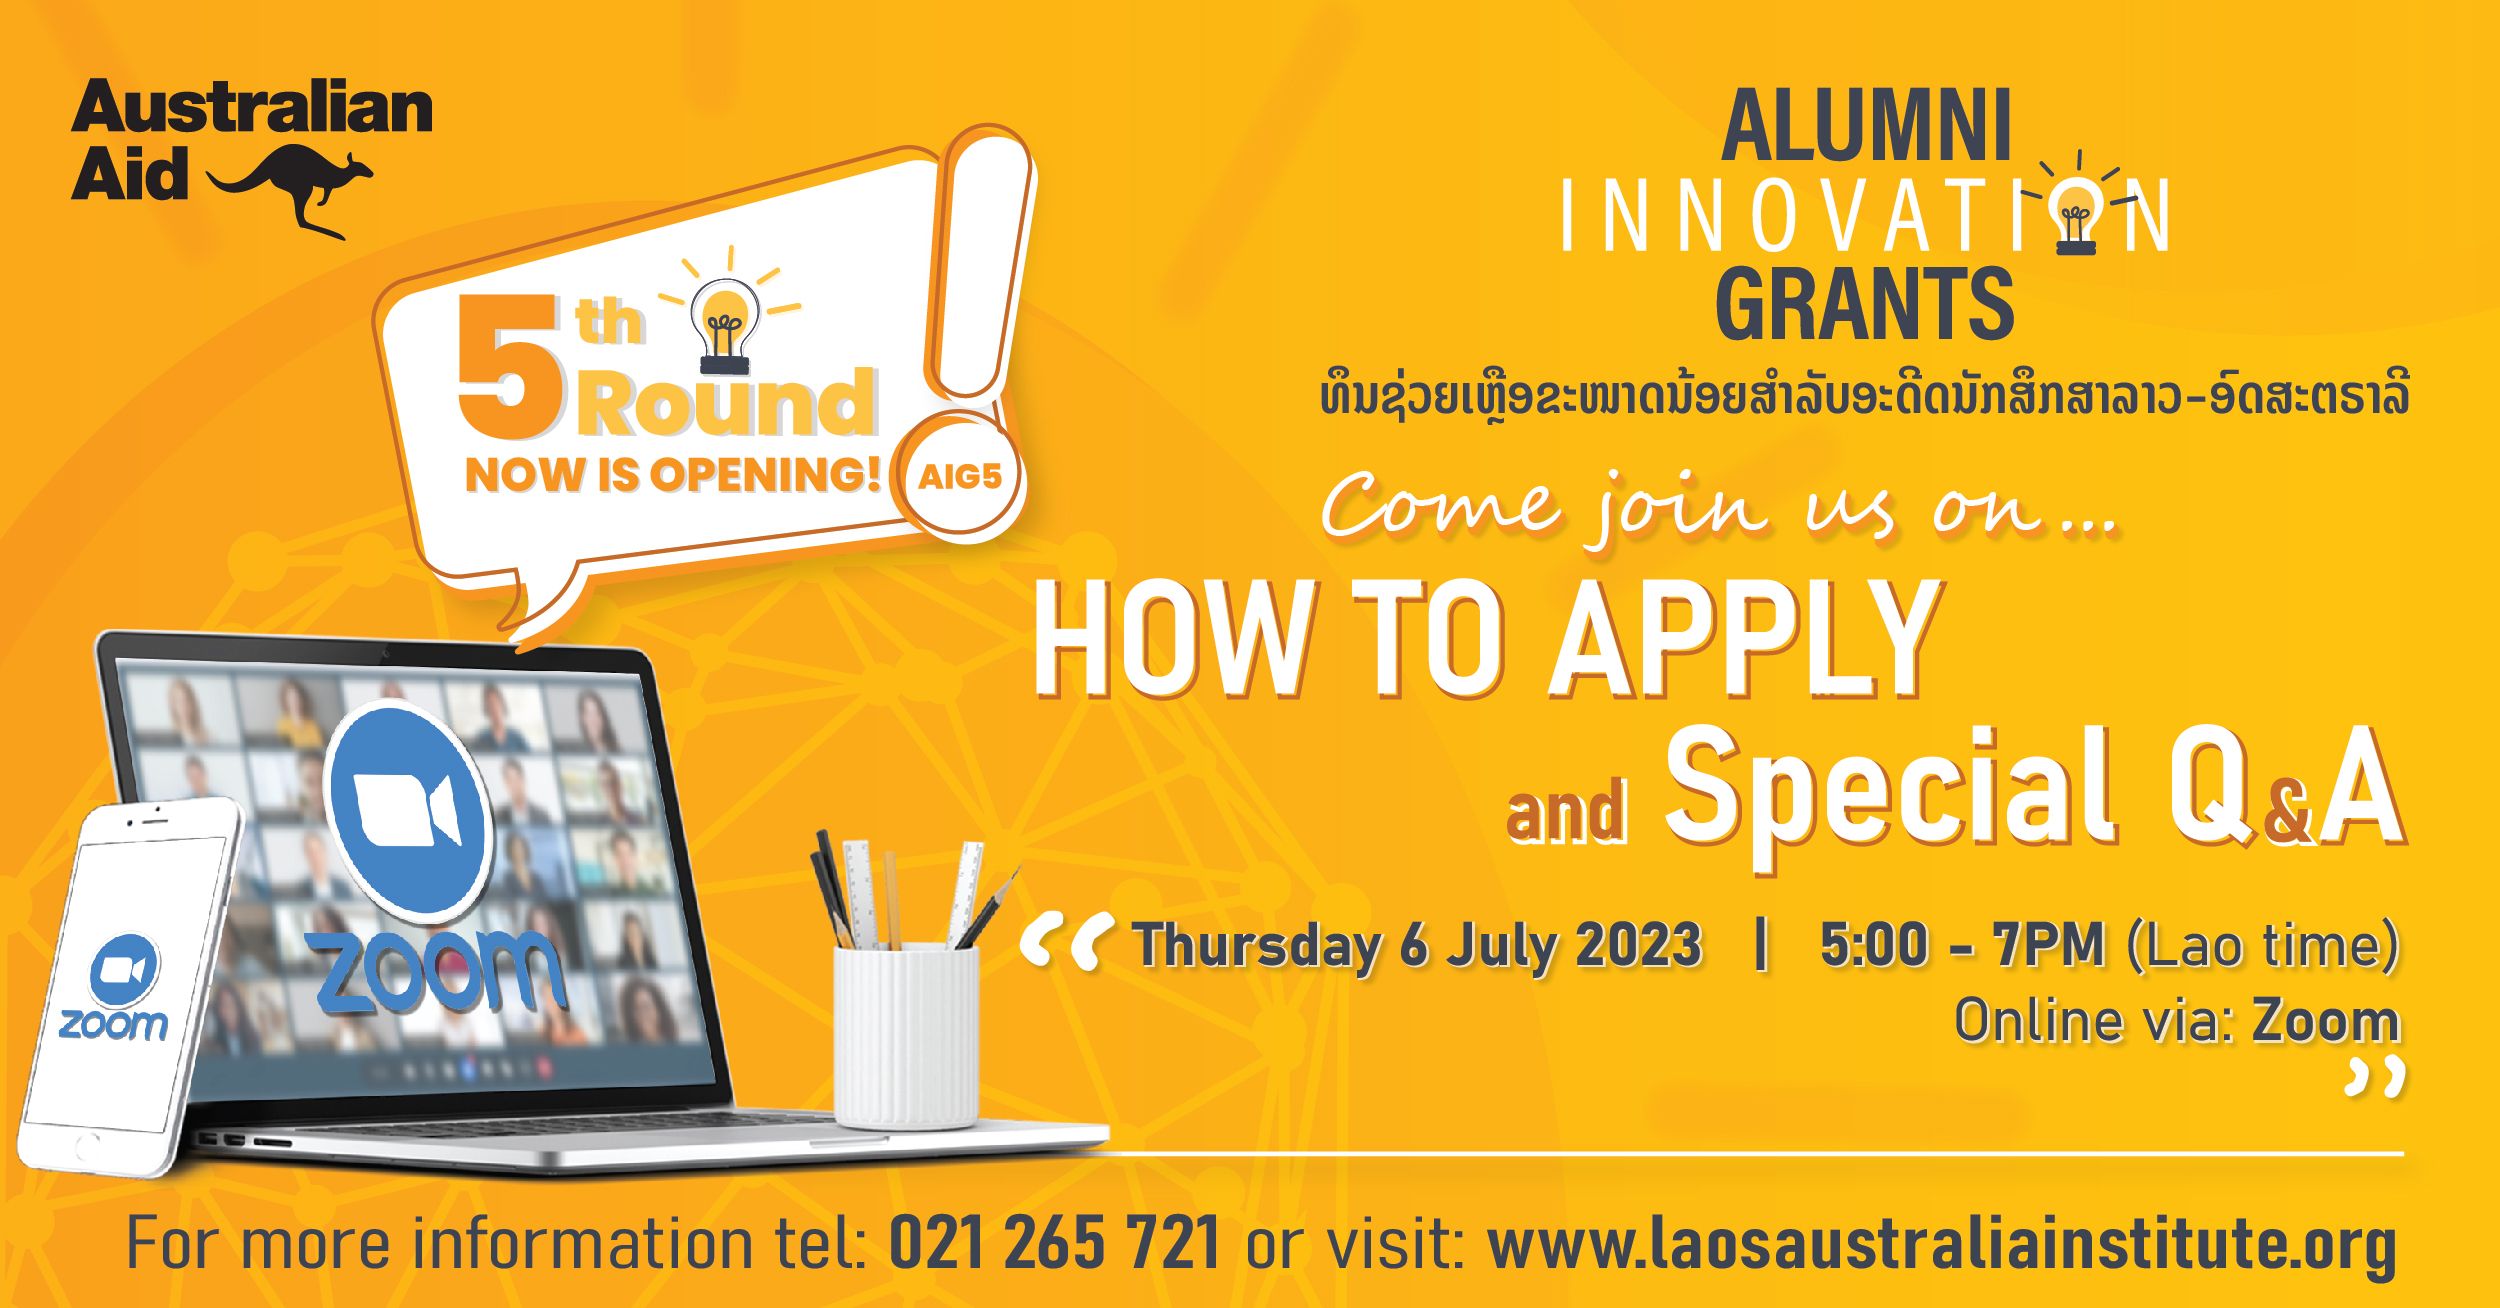 Save the date: “How to Apply for the Alumni Innovation Grants” Online Session